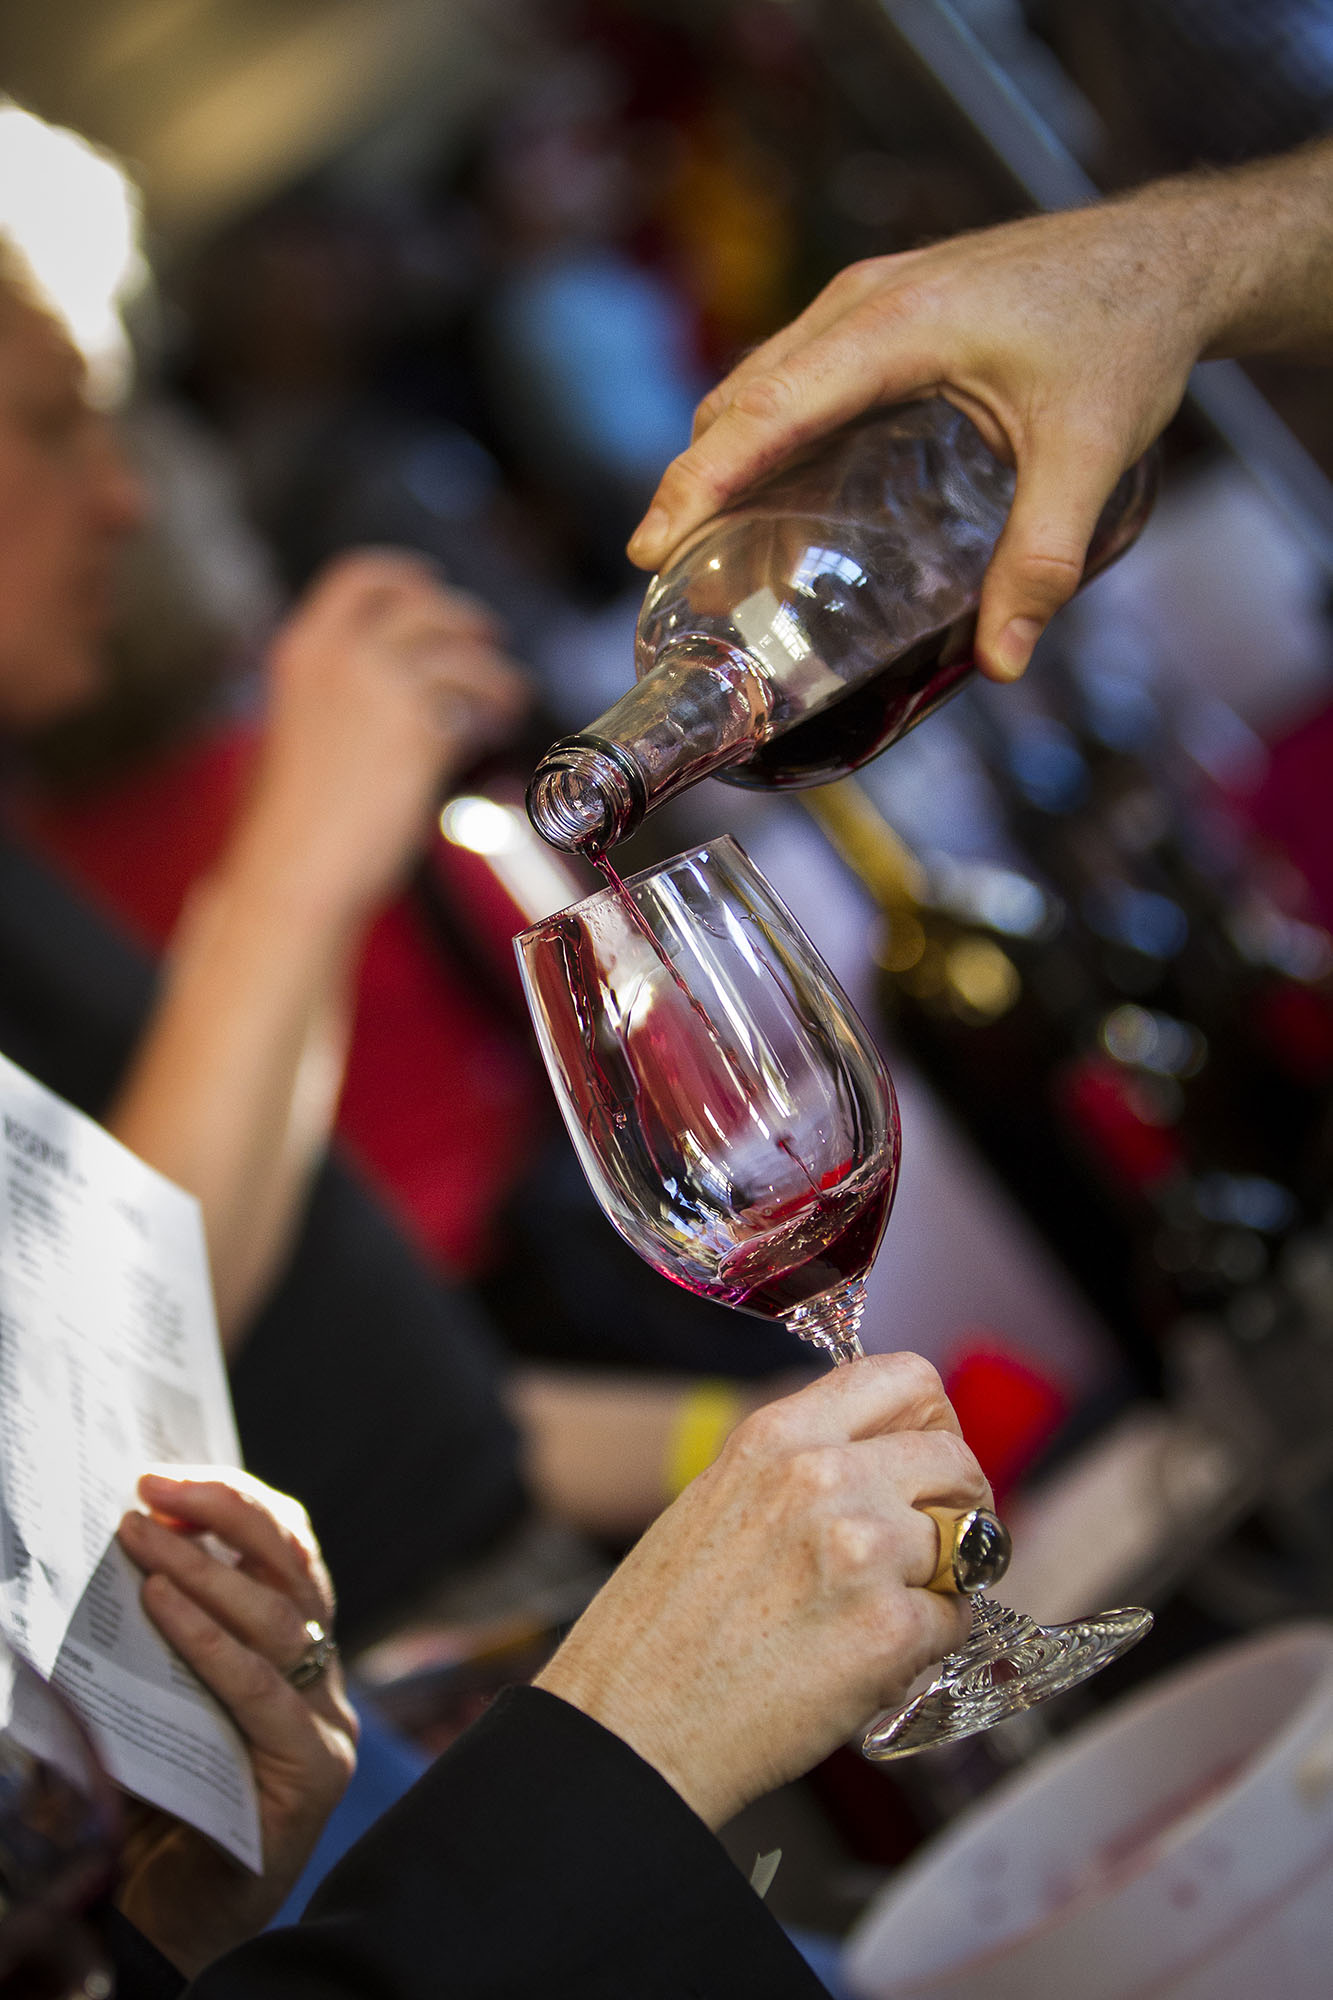 Zinfandel Advocates & Producers (ZAP) moves to a virtual platform on Jan 30 & 31 with its long-running ZinEX tasting. Featuring 36+ CA wineries, 2021's event is FREE to the general public (ages 21+).